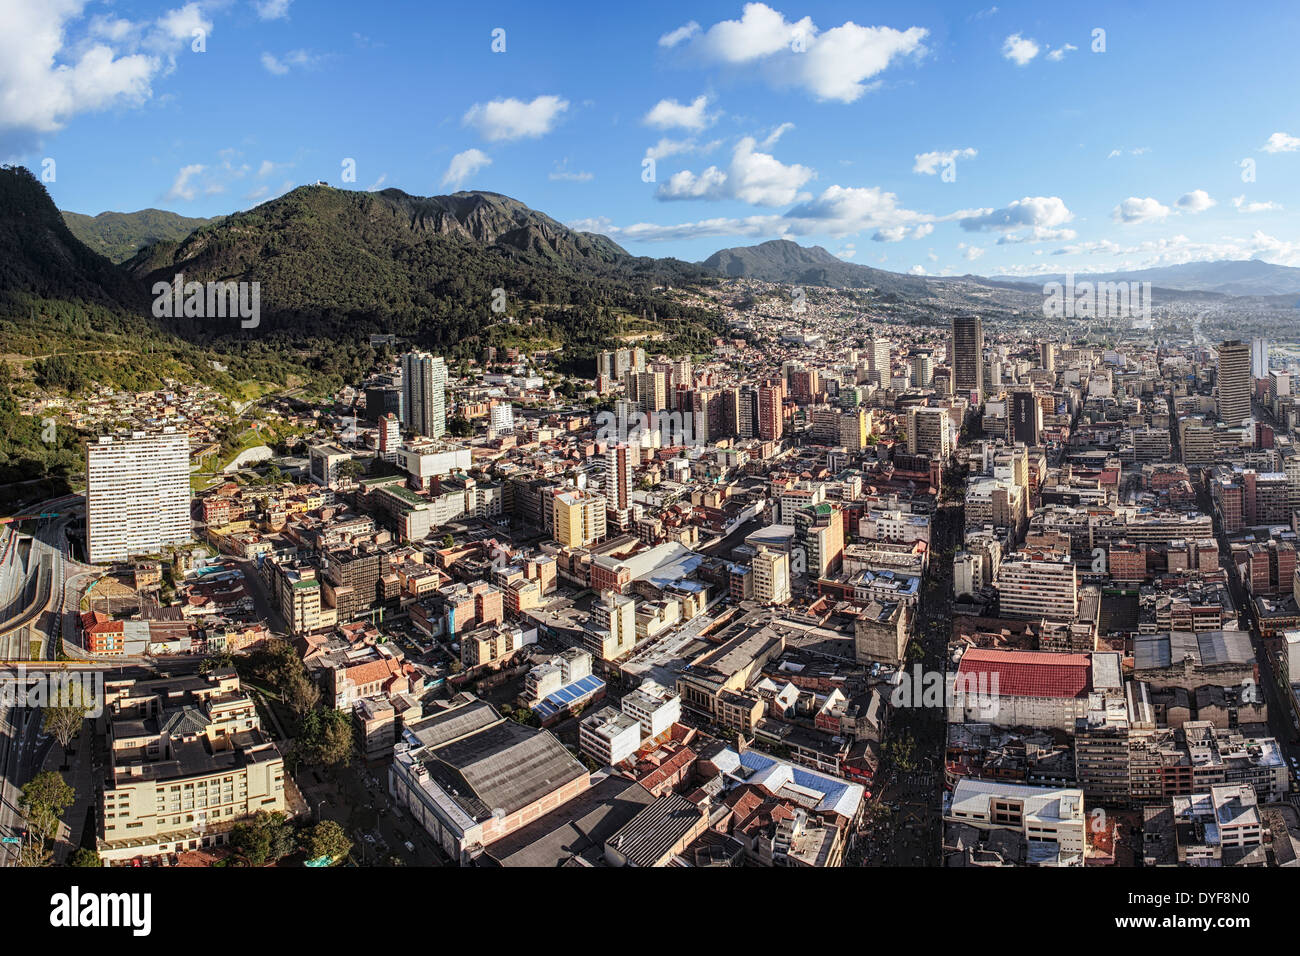 Aerial view of Bogota, the capital of Colombia. Panoramic view from the center to the South with Guadalupe Hill on the left. Stock Photo